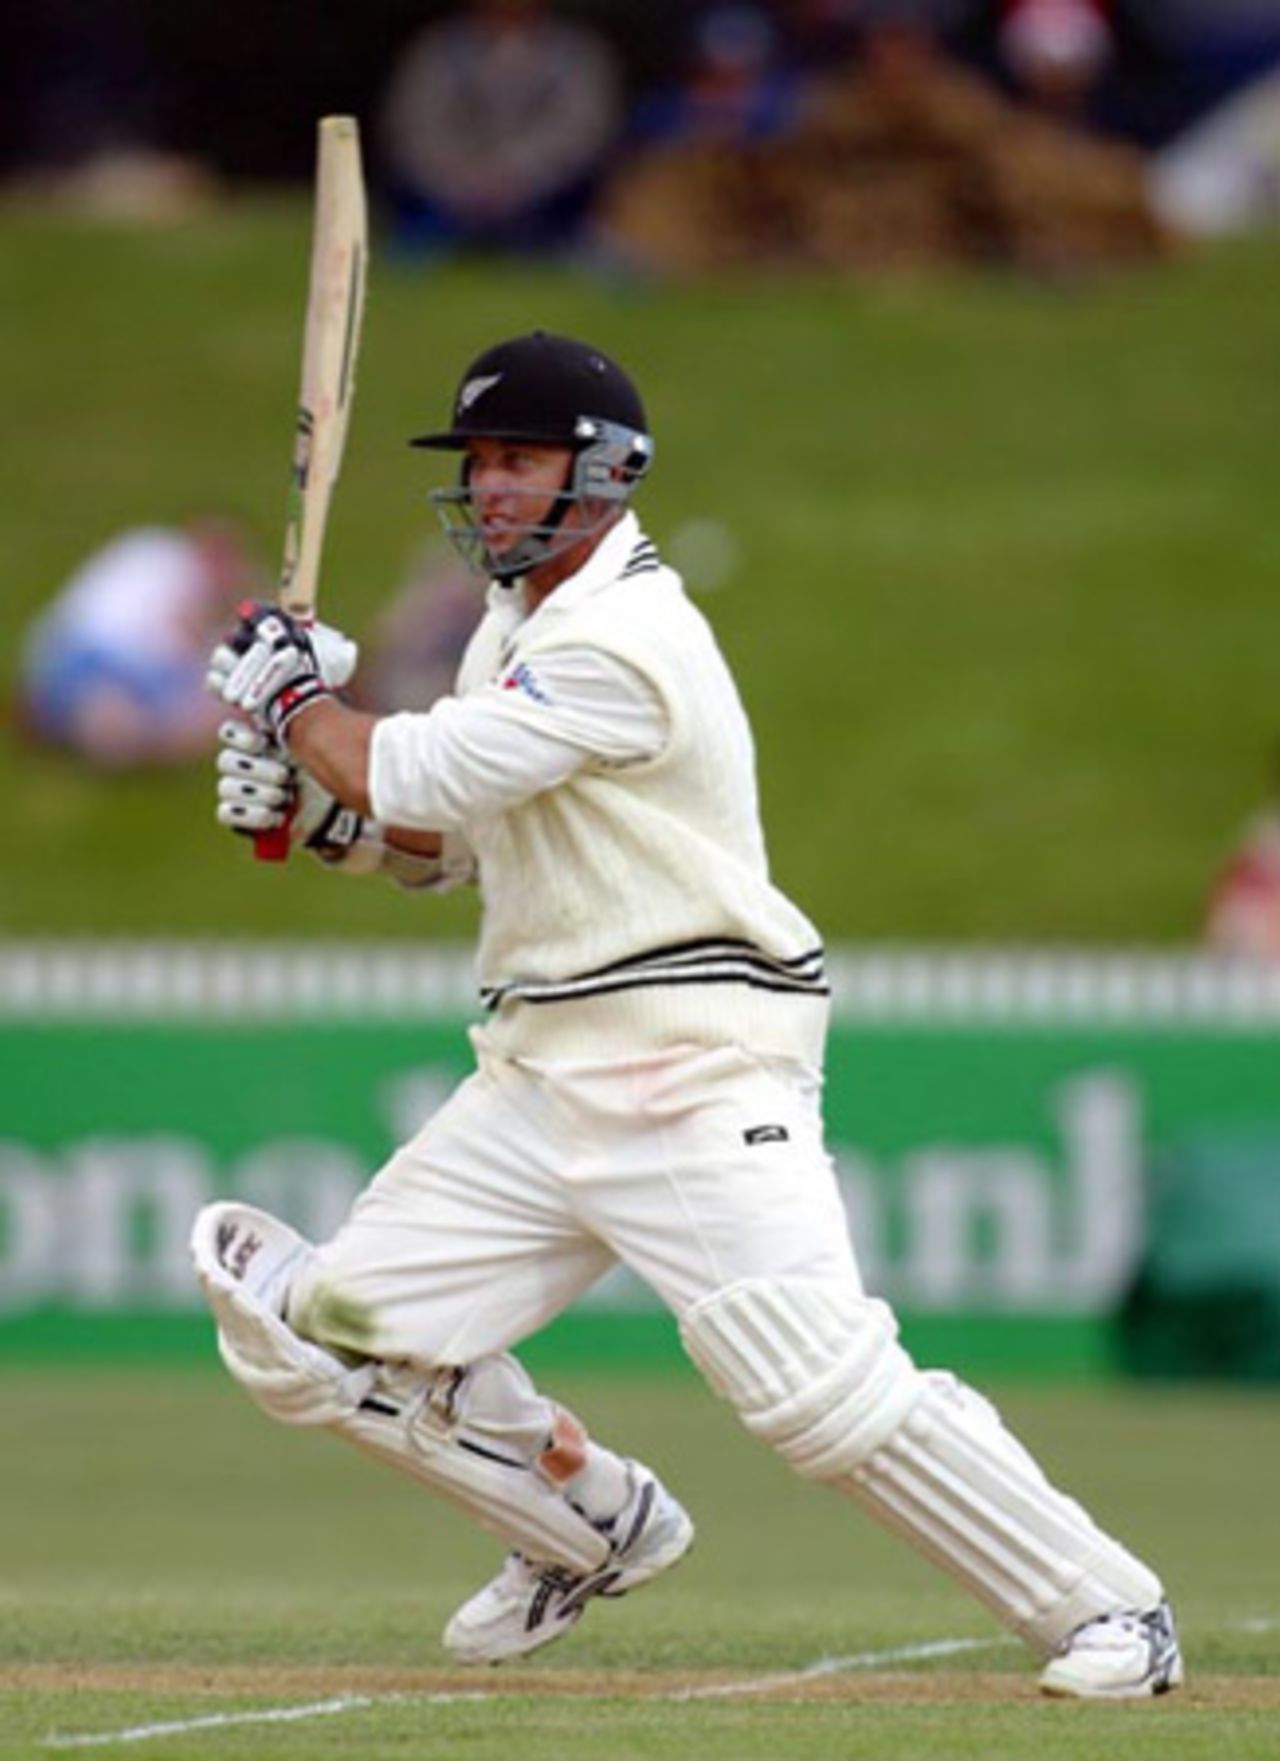 New Zealand batsman Mark Richardson drives a delivery down the ground on the off side during his second innings. Richardson ended the third day on 18 not out. 2nd Test: New Zealand v India at Westpac Park, Hamilton, 19-23 December 2002 (21 December 2002).